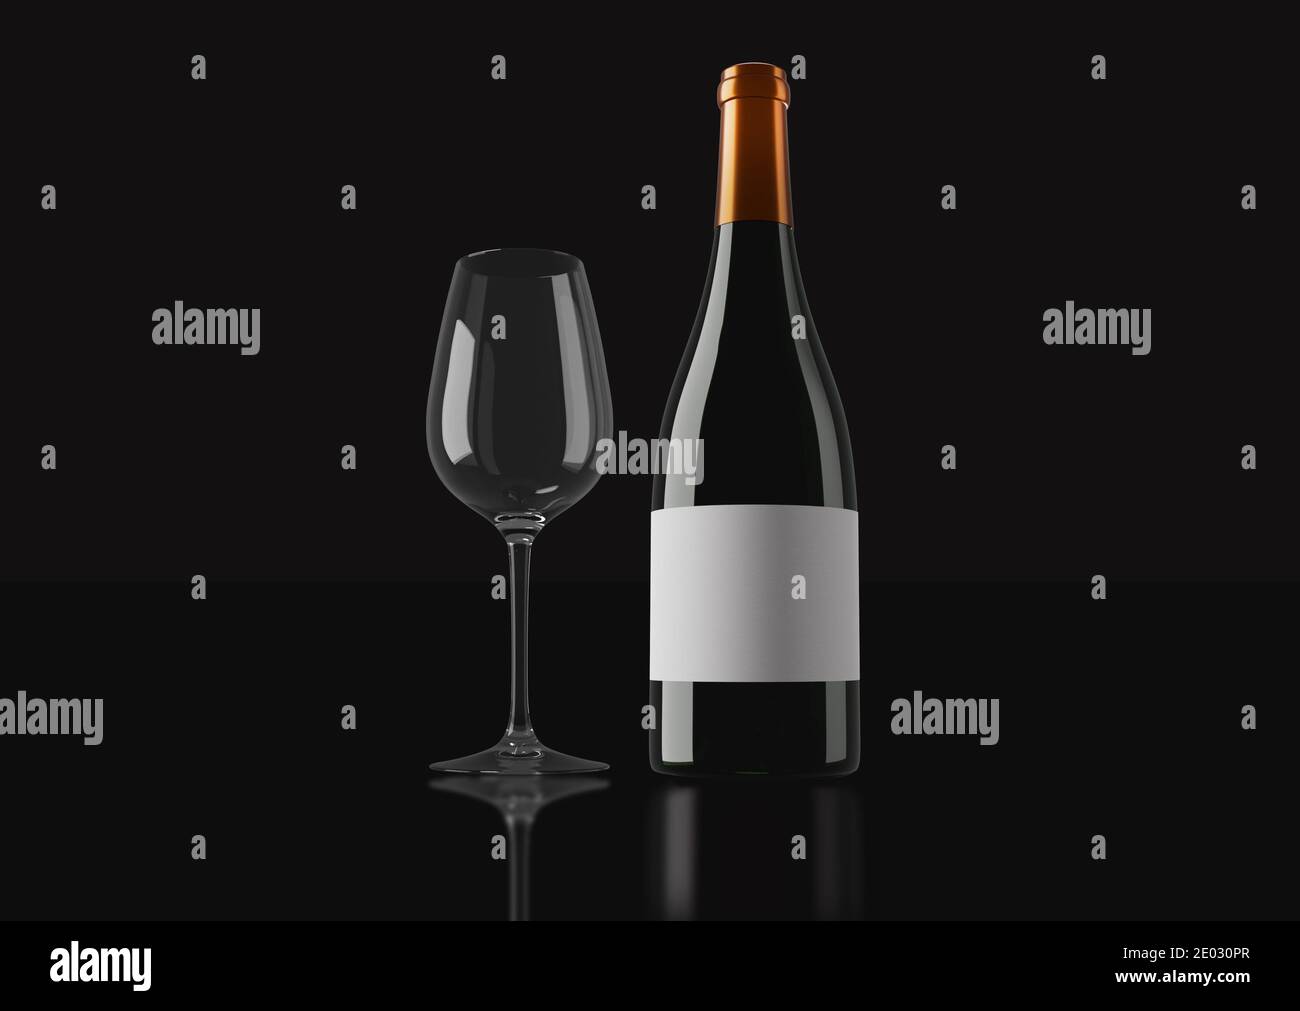 Bottle of red wine and a glass cup in a dark background Stock Photo